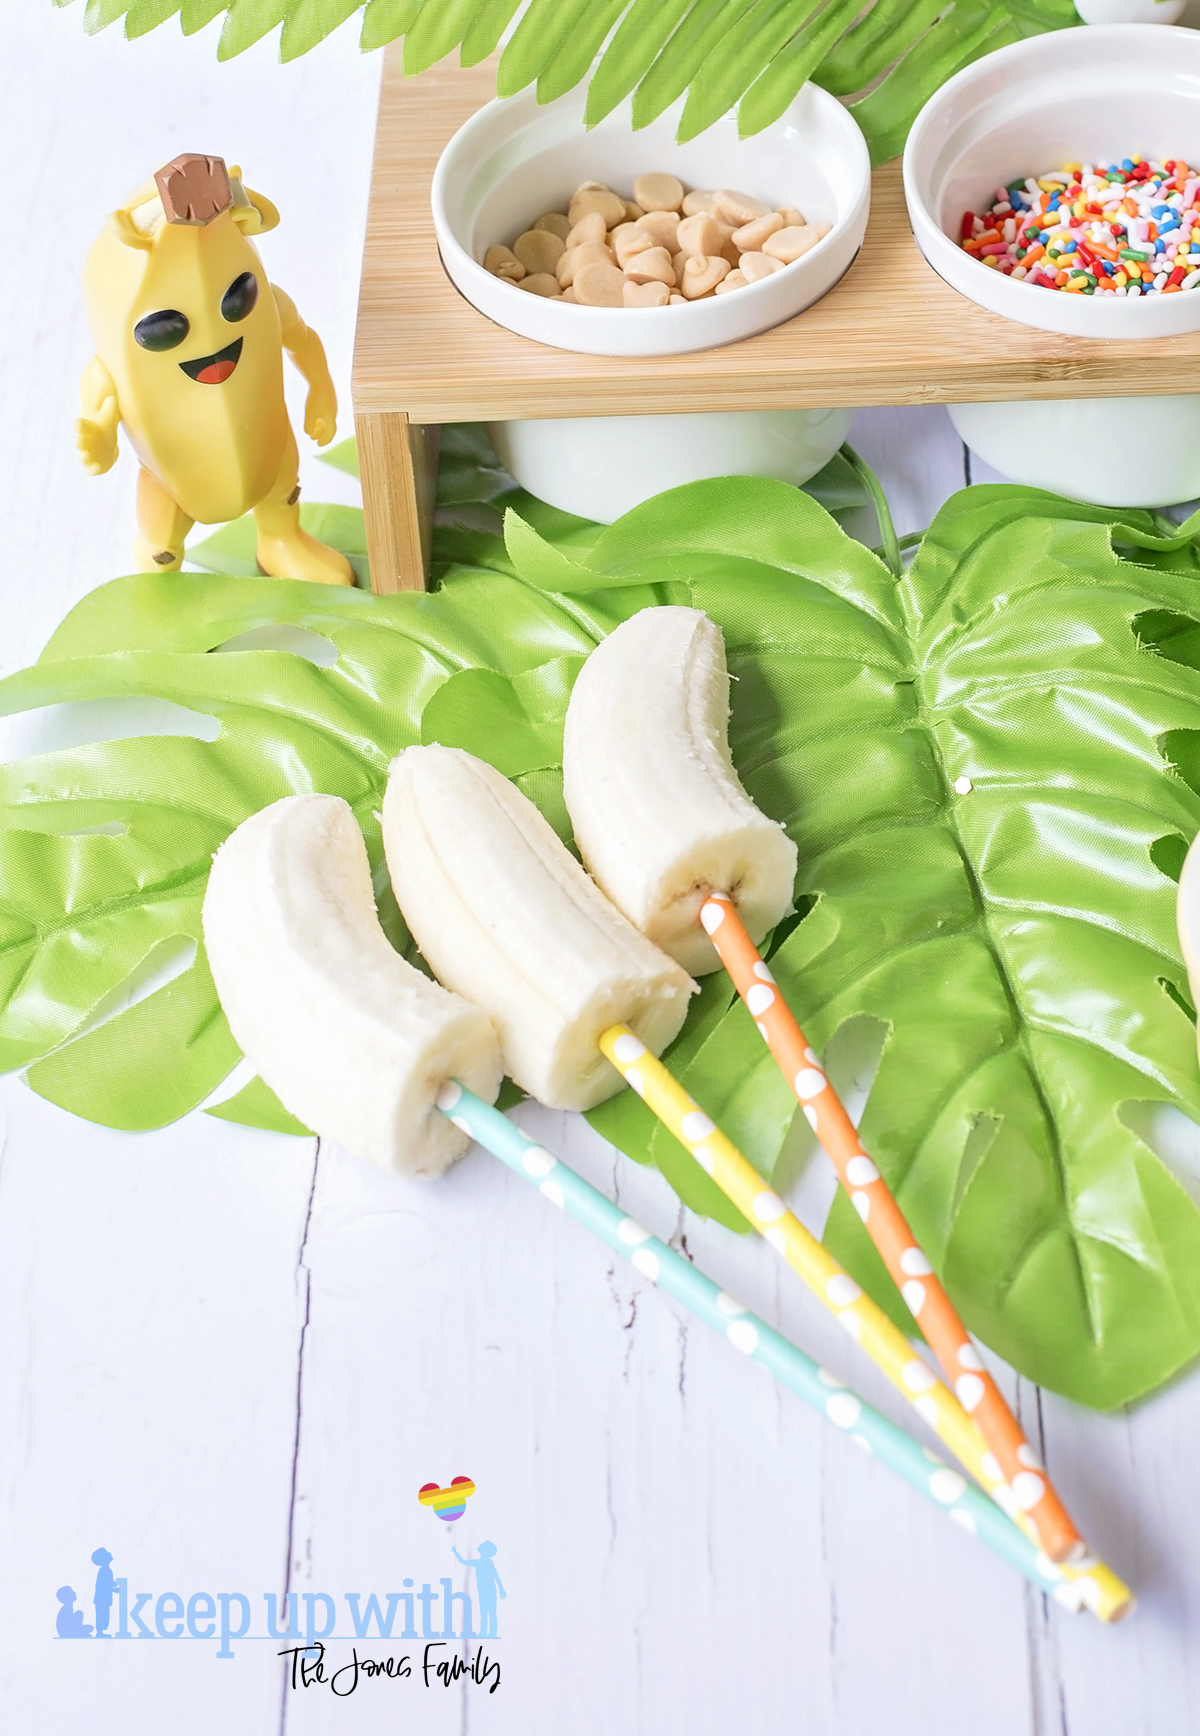 Image shows Peely’s Banana Fortnite Fondue Bar, fun food for families. A Funko Pop Vinyl Peely stands on a fondue bar next to bananas on spotted coloured straws. Image by Sara-Jayne from Keep Up With The Jones Family.